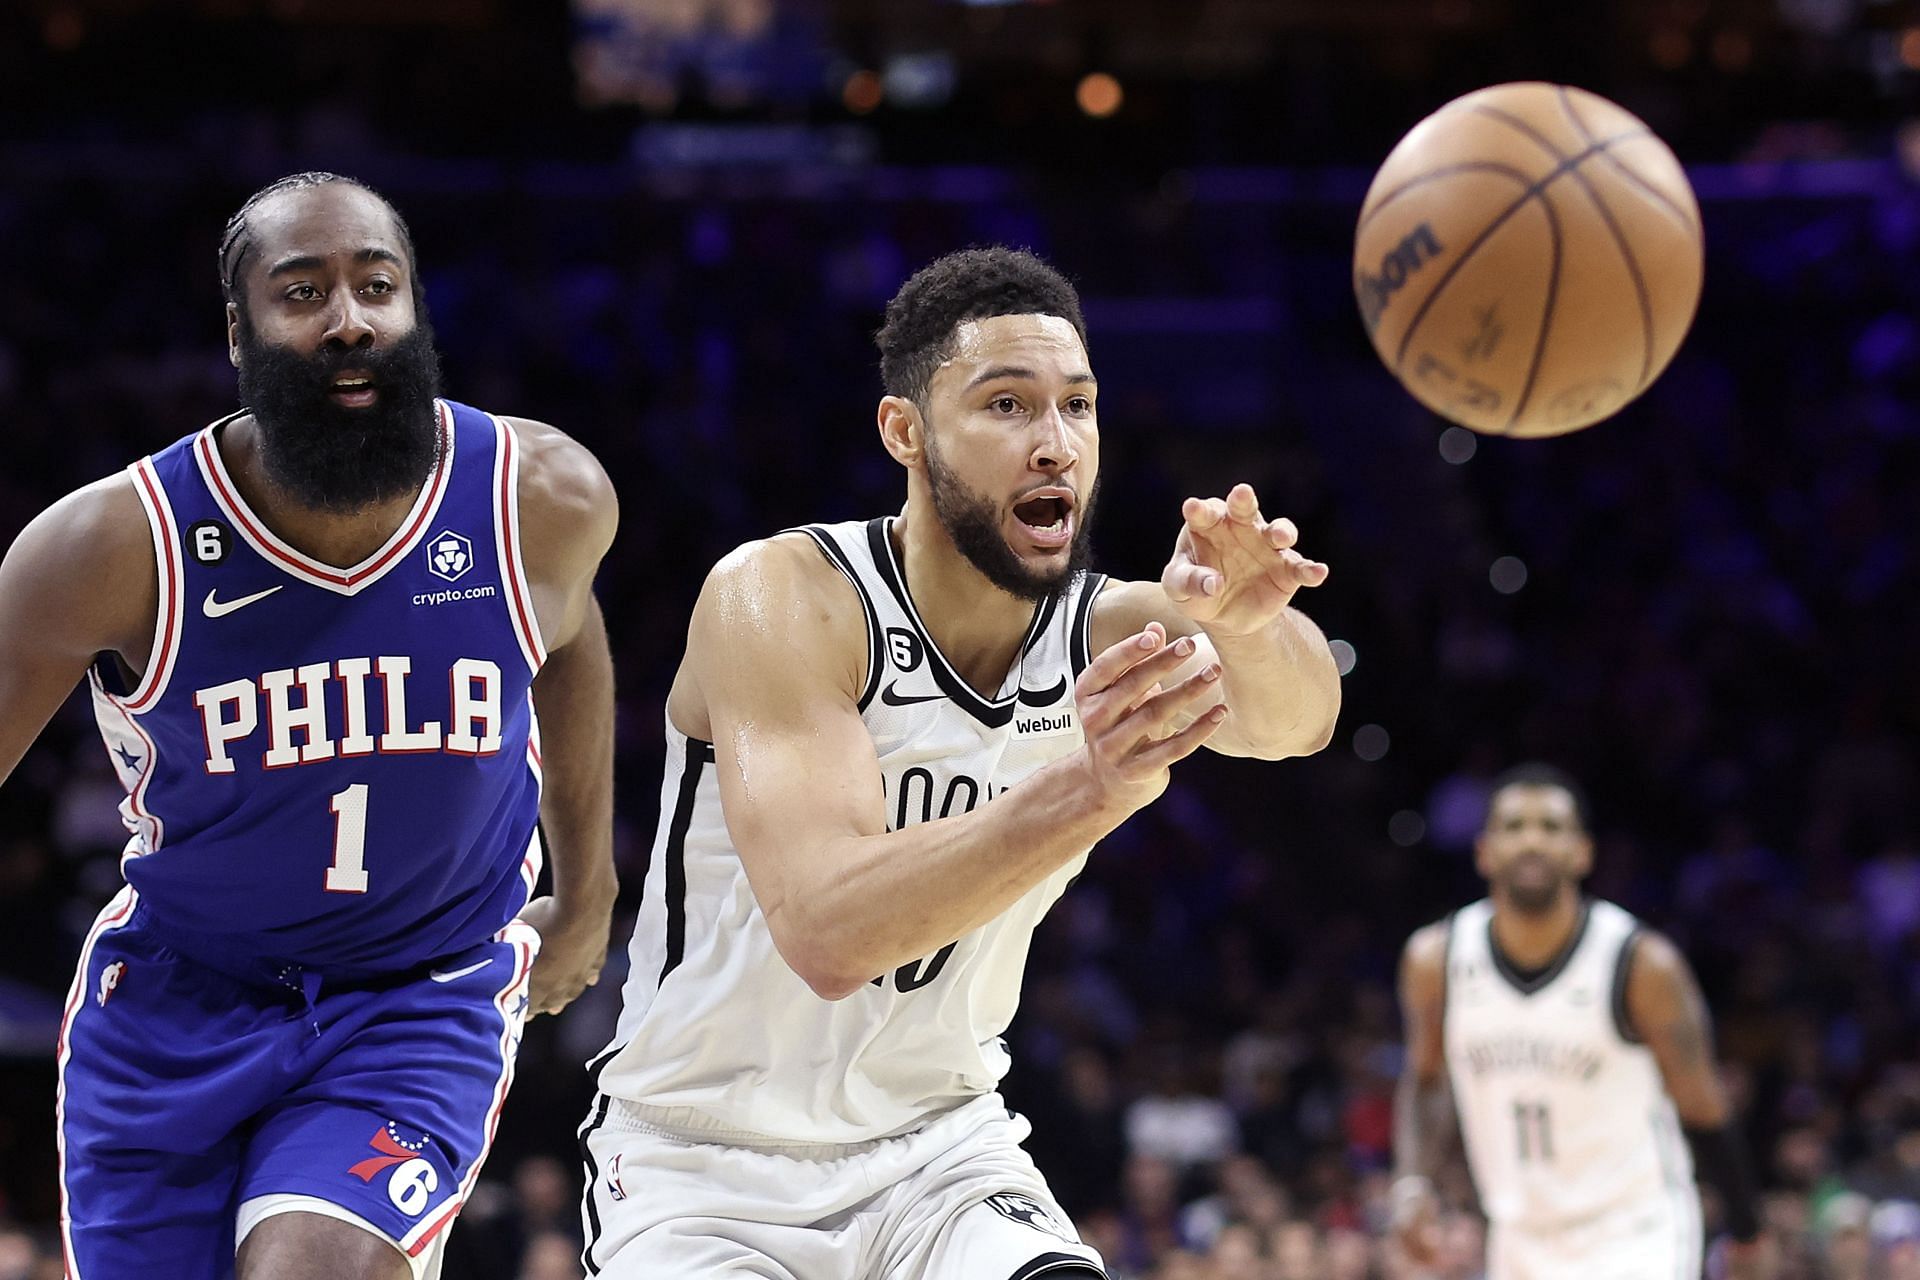 Philly has emerged as the lopsided winner of the trade involving James Harden and Ben Simmons.